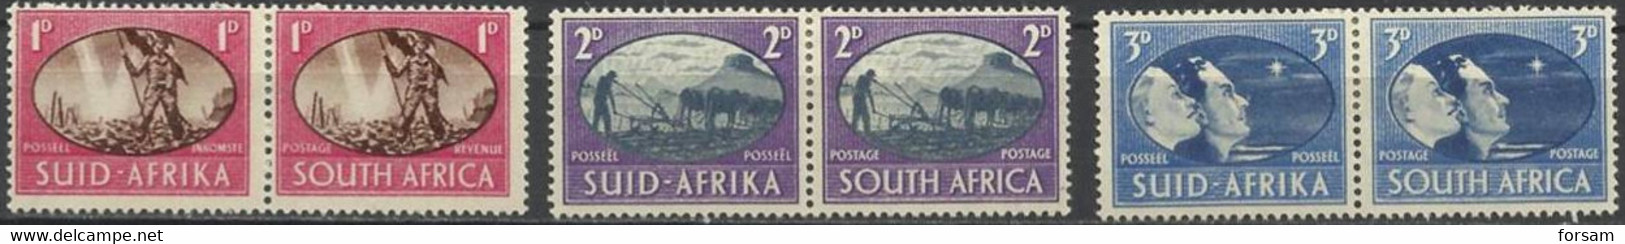 SOUTH AFRICA..1945..Michel # 175 - 180...MLH. - Unclassified